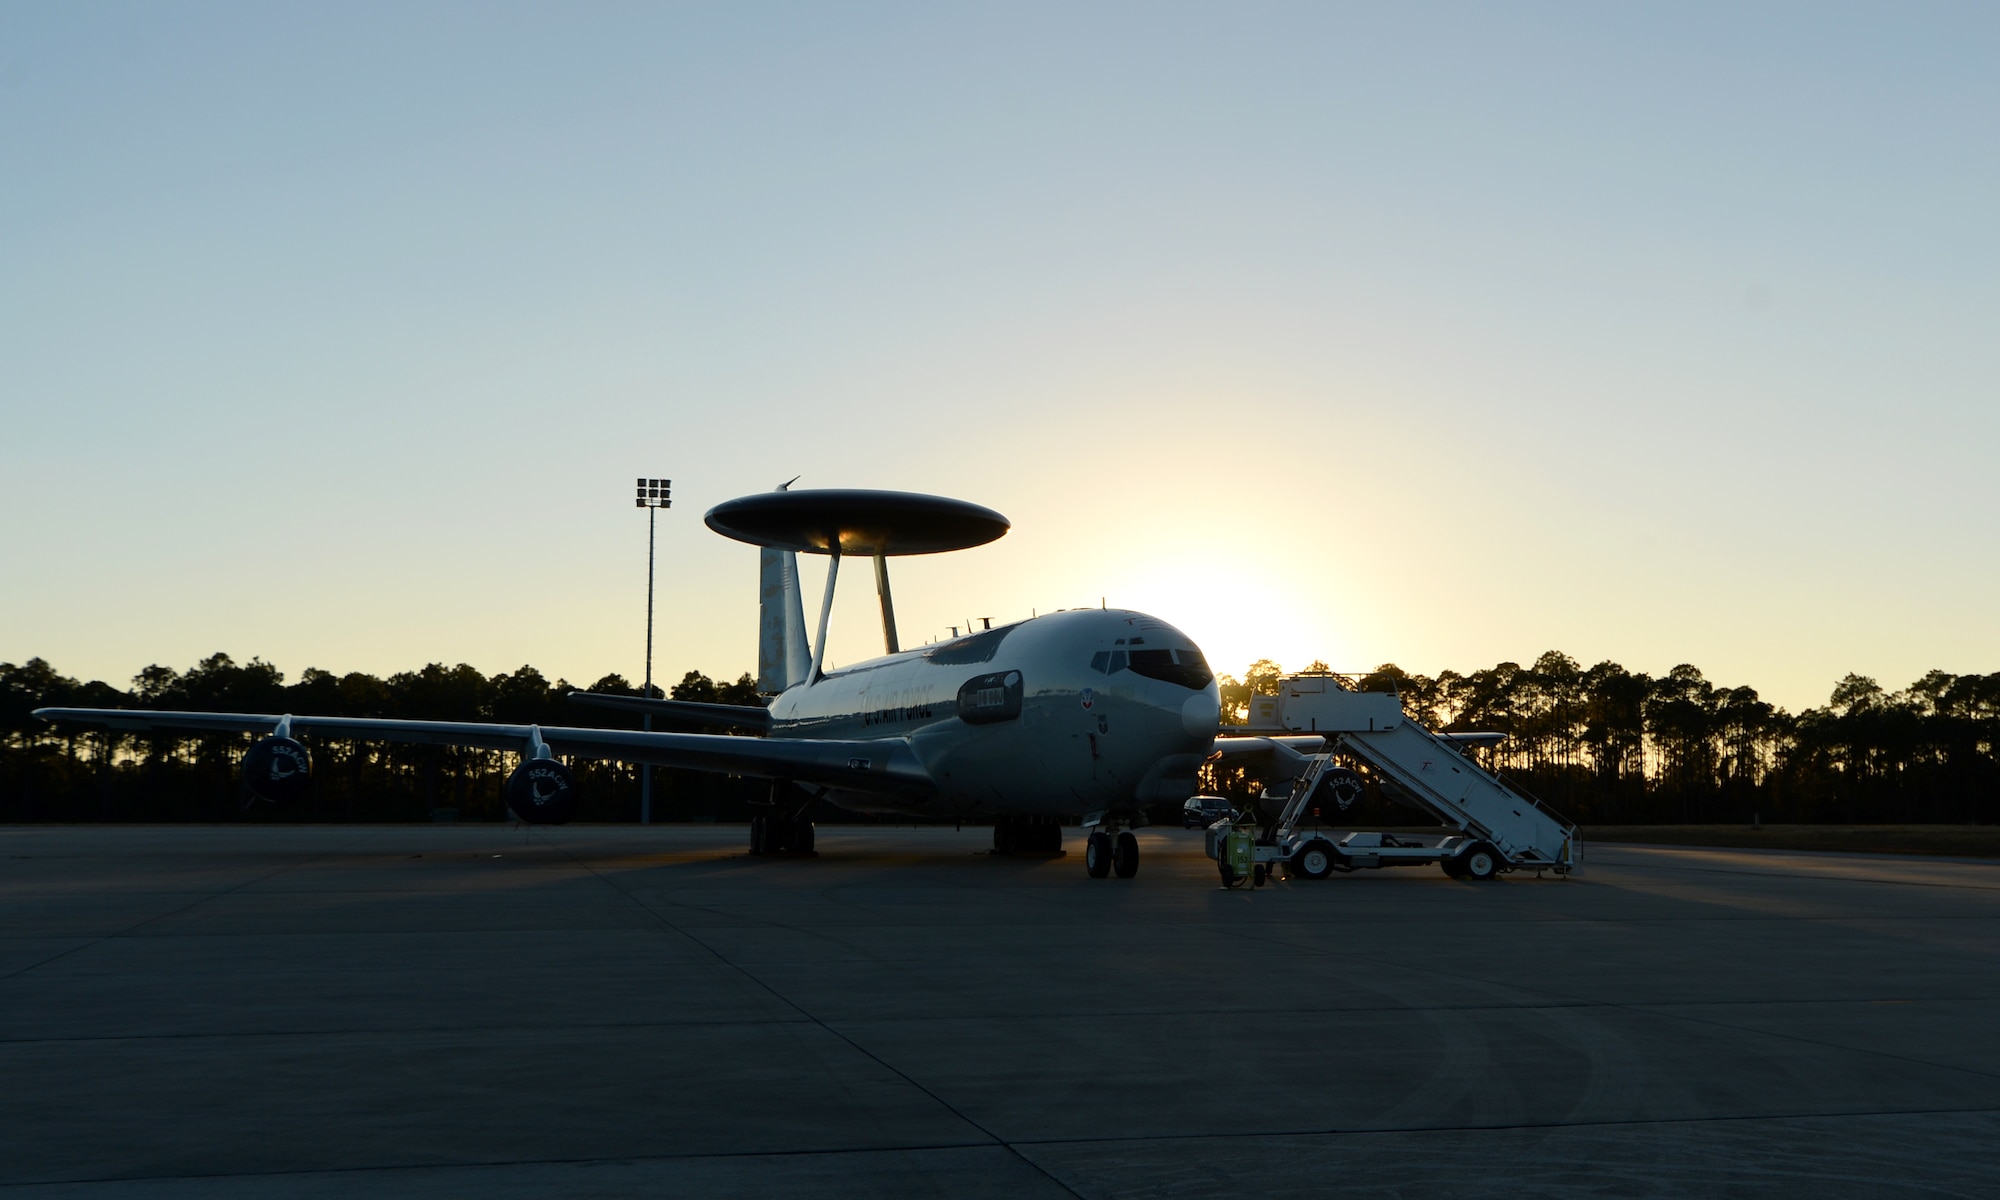 A U.S. Air Force E-3 Sentry Airborne Warning and Control System from 552nd Air Control Wing, Tinker Air Force Base, Okla., sits as the sun sets over the flightline at Tyndall Air Force Base, Fla., Dec. 6, 2016. The AWACS is at Tyndall in support of concurrent aerial exercises Checkered Flag 17-1 and Combat Archer 17-3 that runs Dec. 5-16. (U.S. Air Force photo by Airman 1st Class Isaiah J. Soliz/Released)